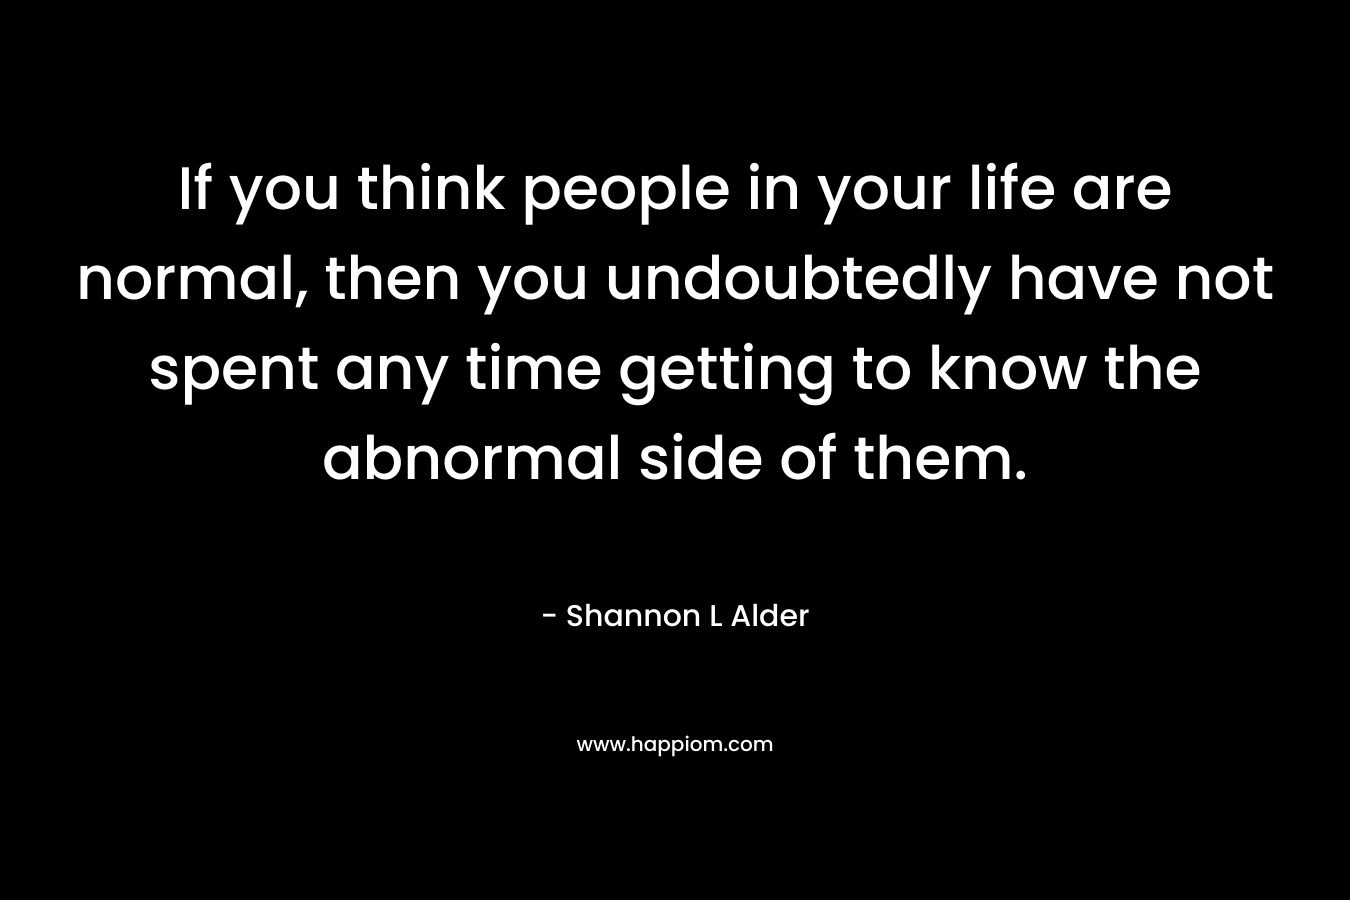 If you think people in your life are normal, then you undoubtedly have not spent any time getting to know the abnormal side of them.